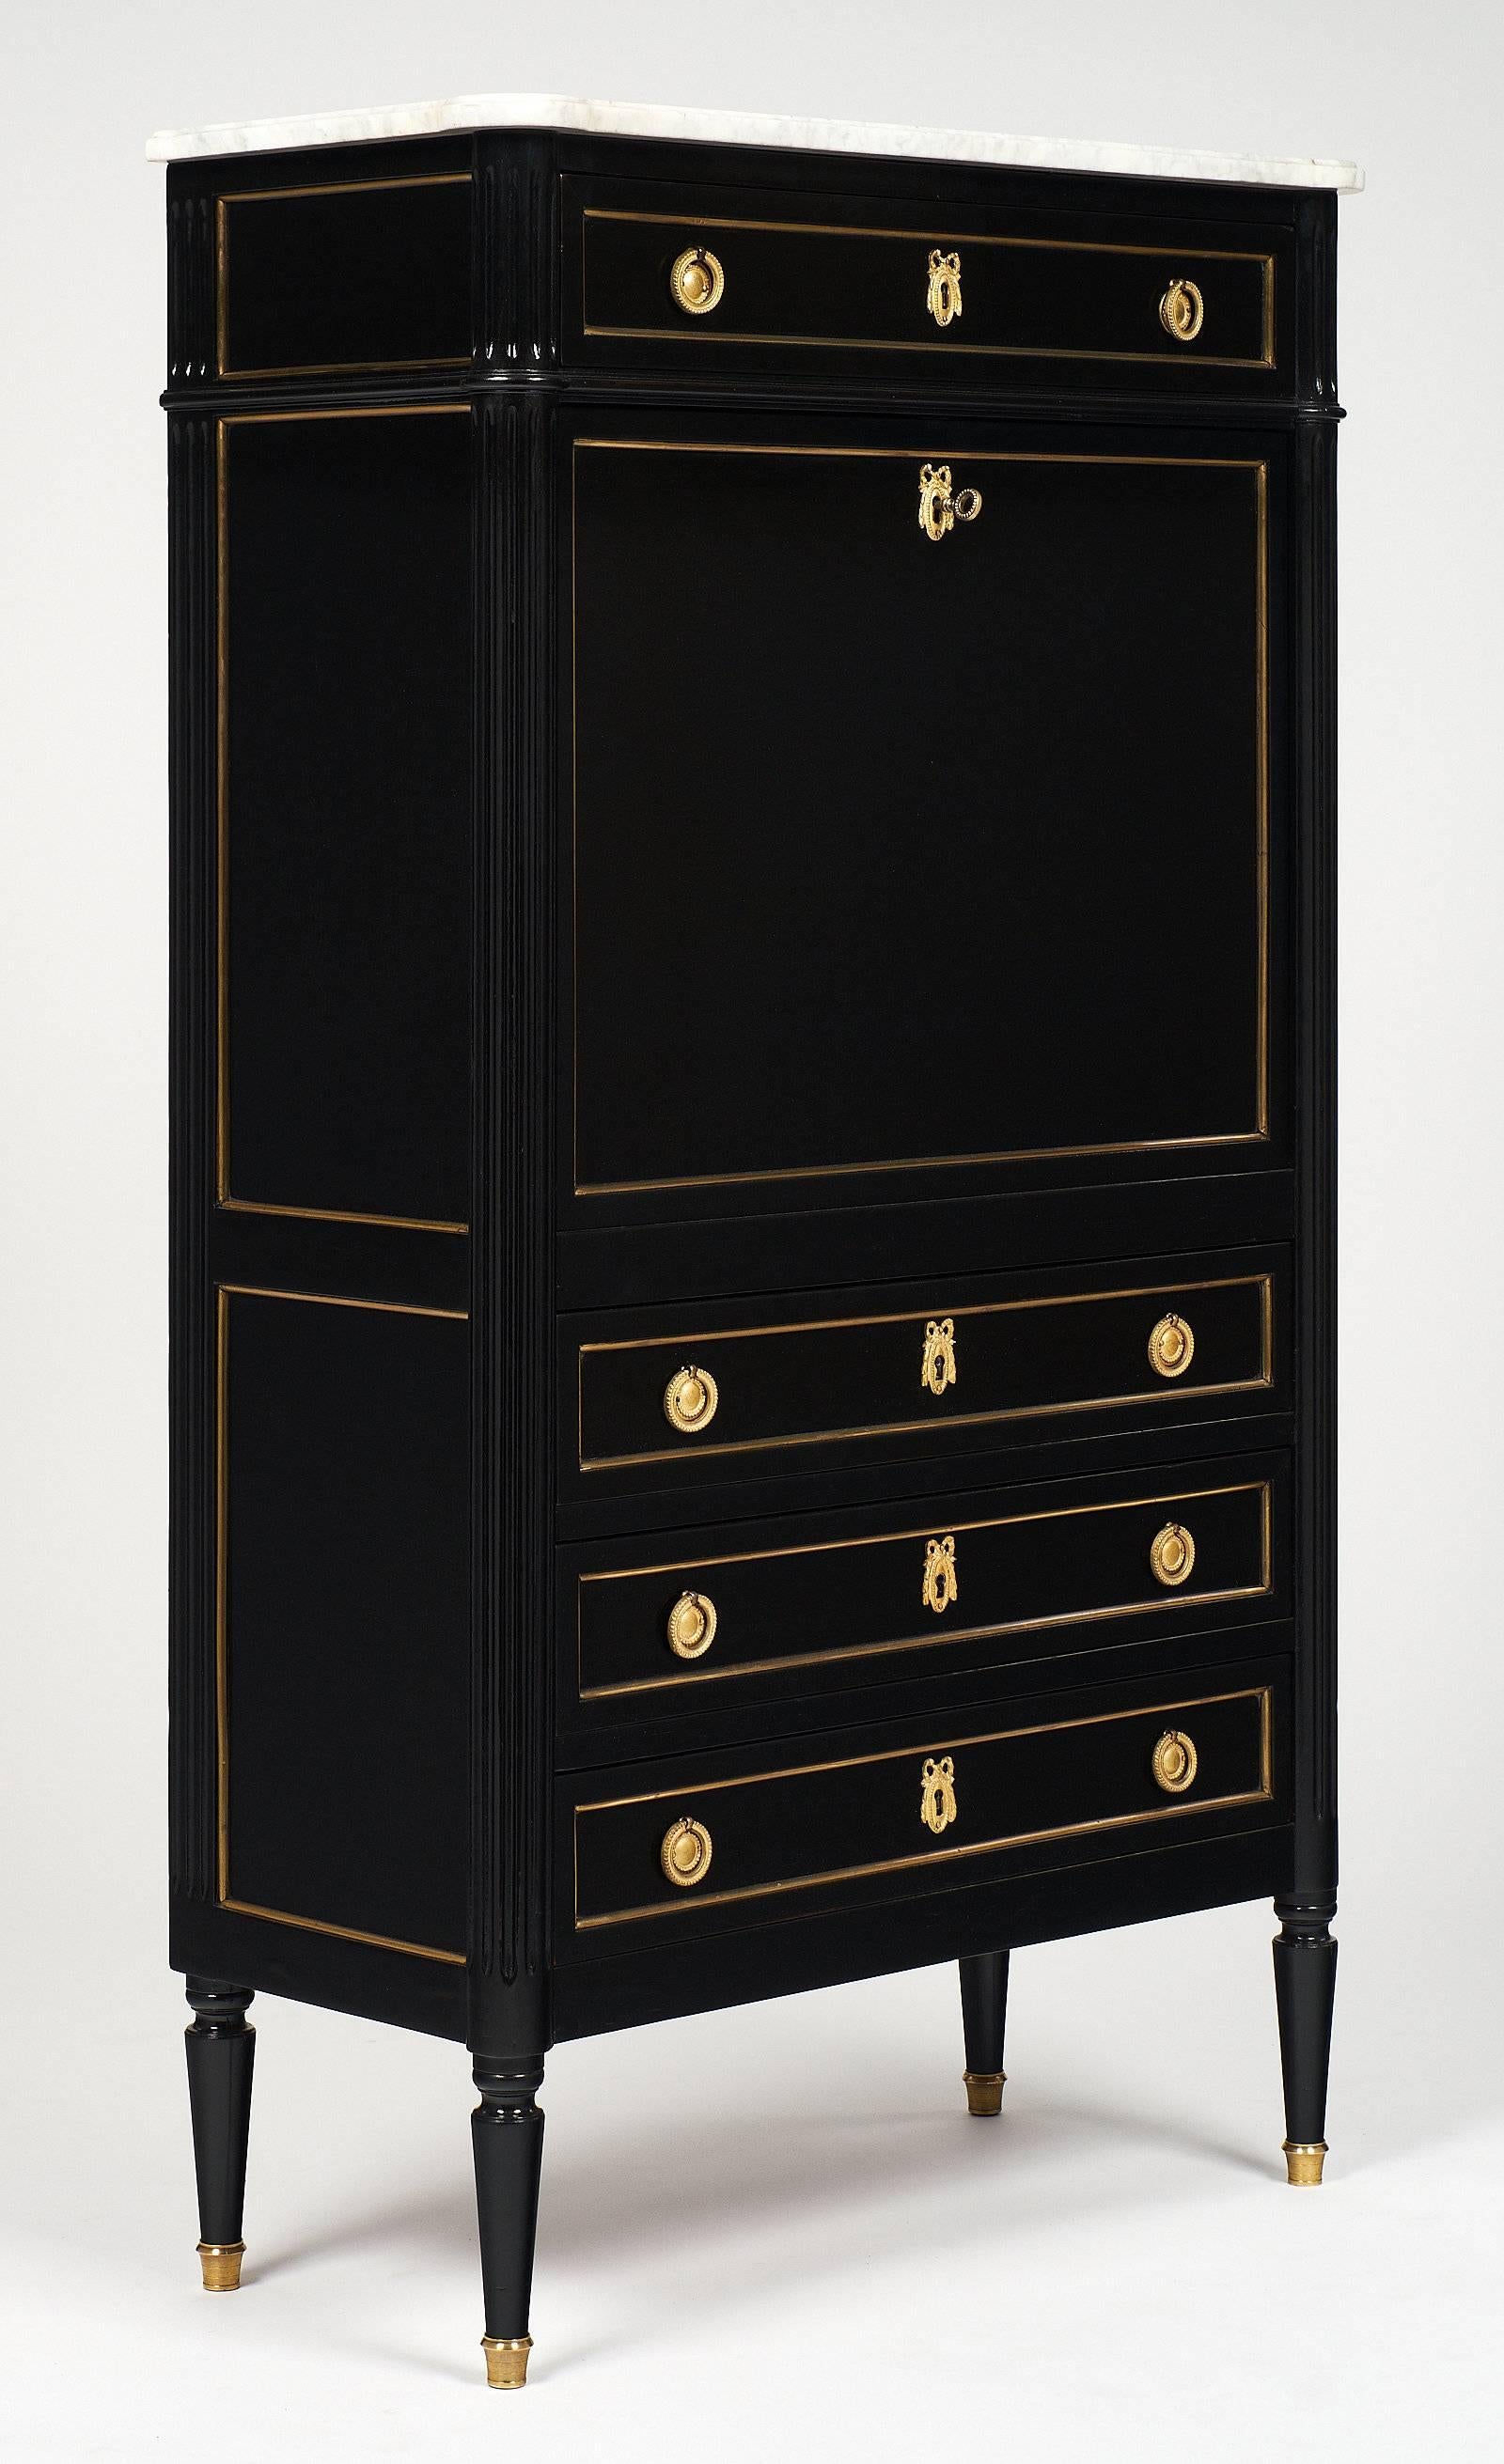 Elegant Louis XVI style French antique secrétaire made of mahogany and topped with an intact Carrara marble slab. This piece is ebonized and finished in a lustrous French polish. The four dovetailed drawers provide ample storage, and the gilt brass